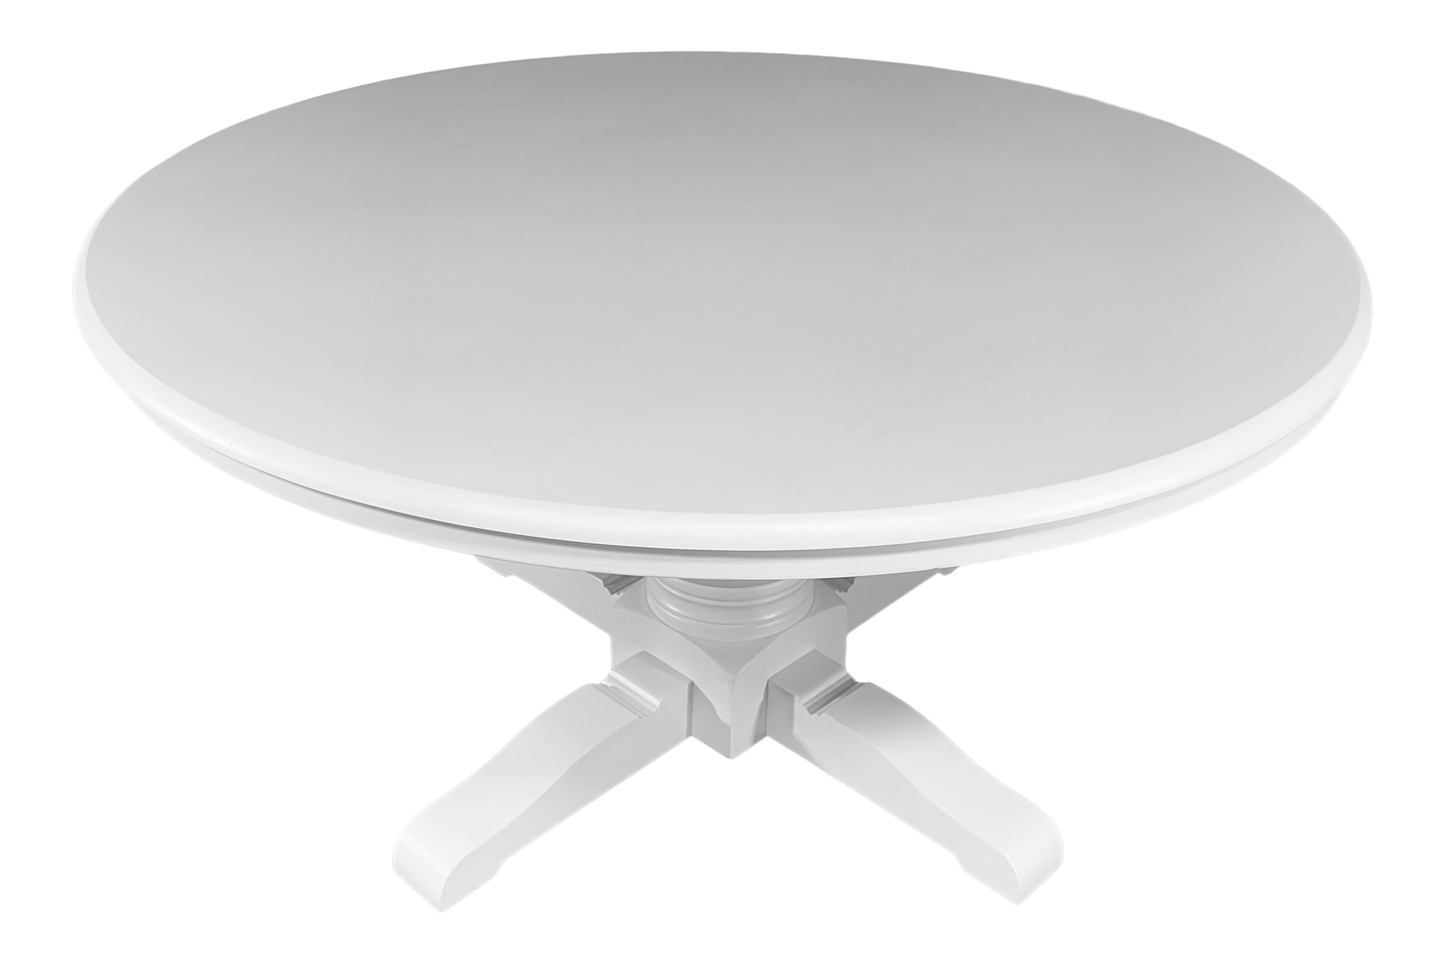 Parisienne Dining Table - White (1500mm)